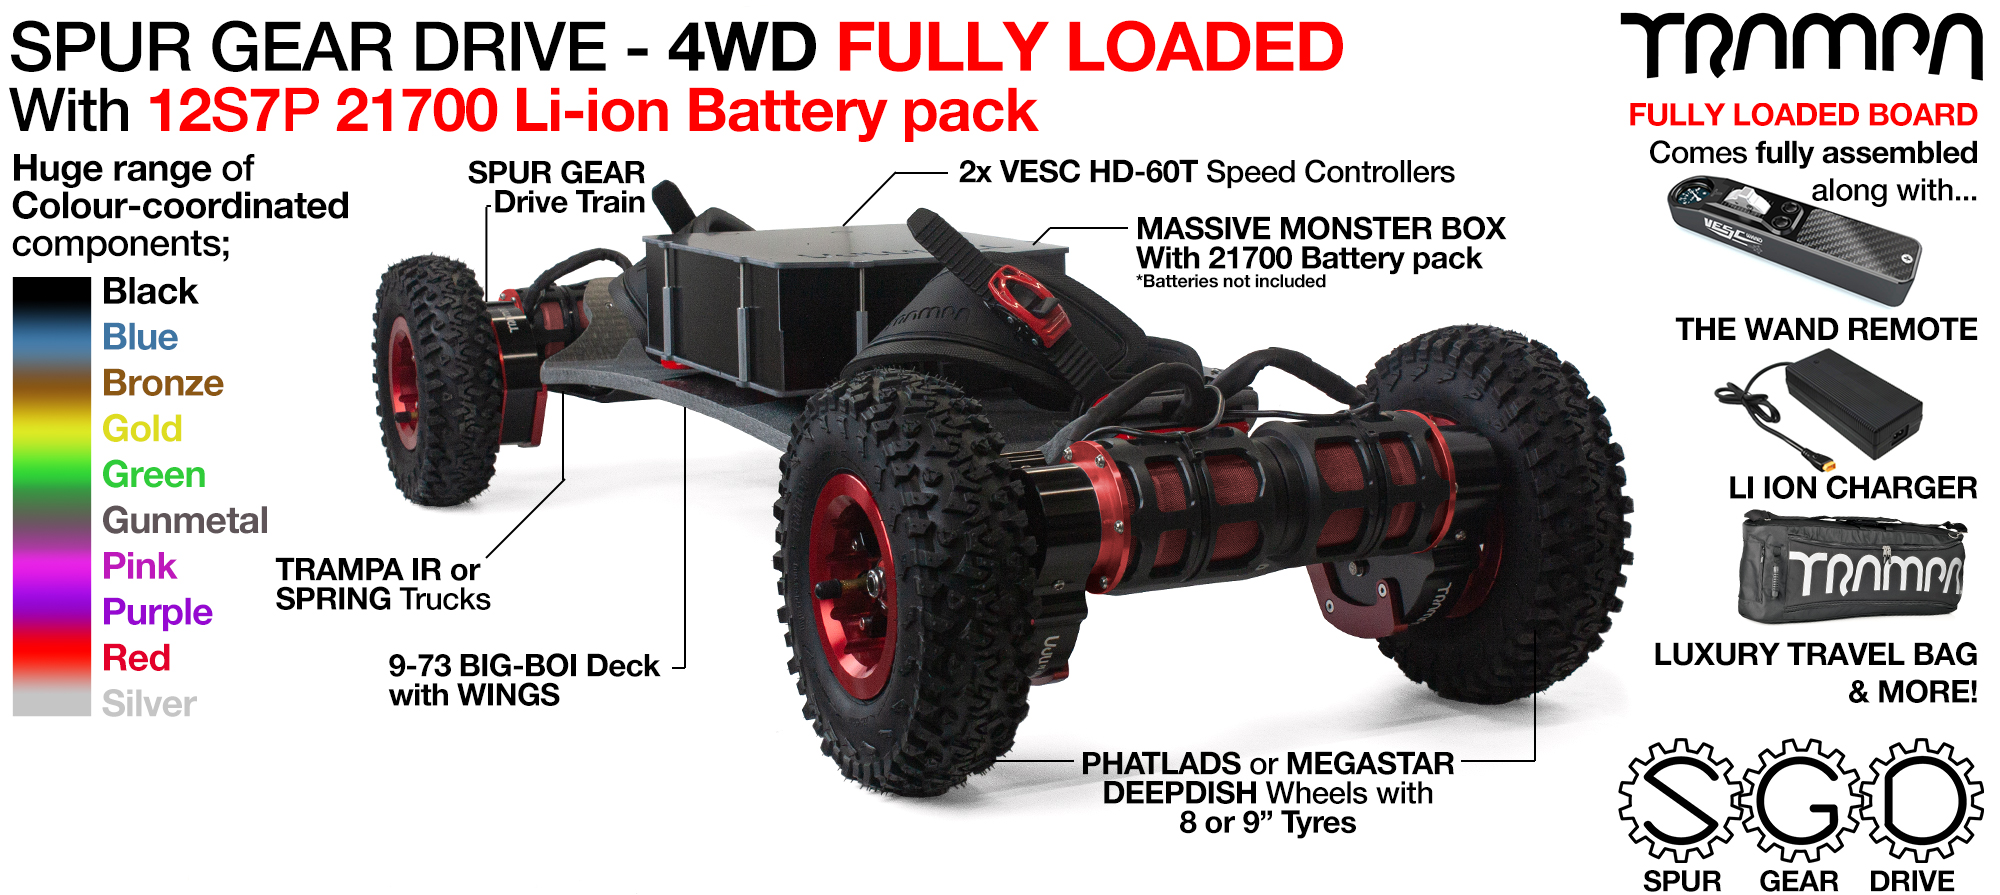 4WD SPUR GEAR DRIVE BIGBOI 21700 Battery pack in Massive Box with 2x VESC HD-60T FULLY LOADED TRAMPA Electric Mountainboard 